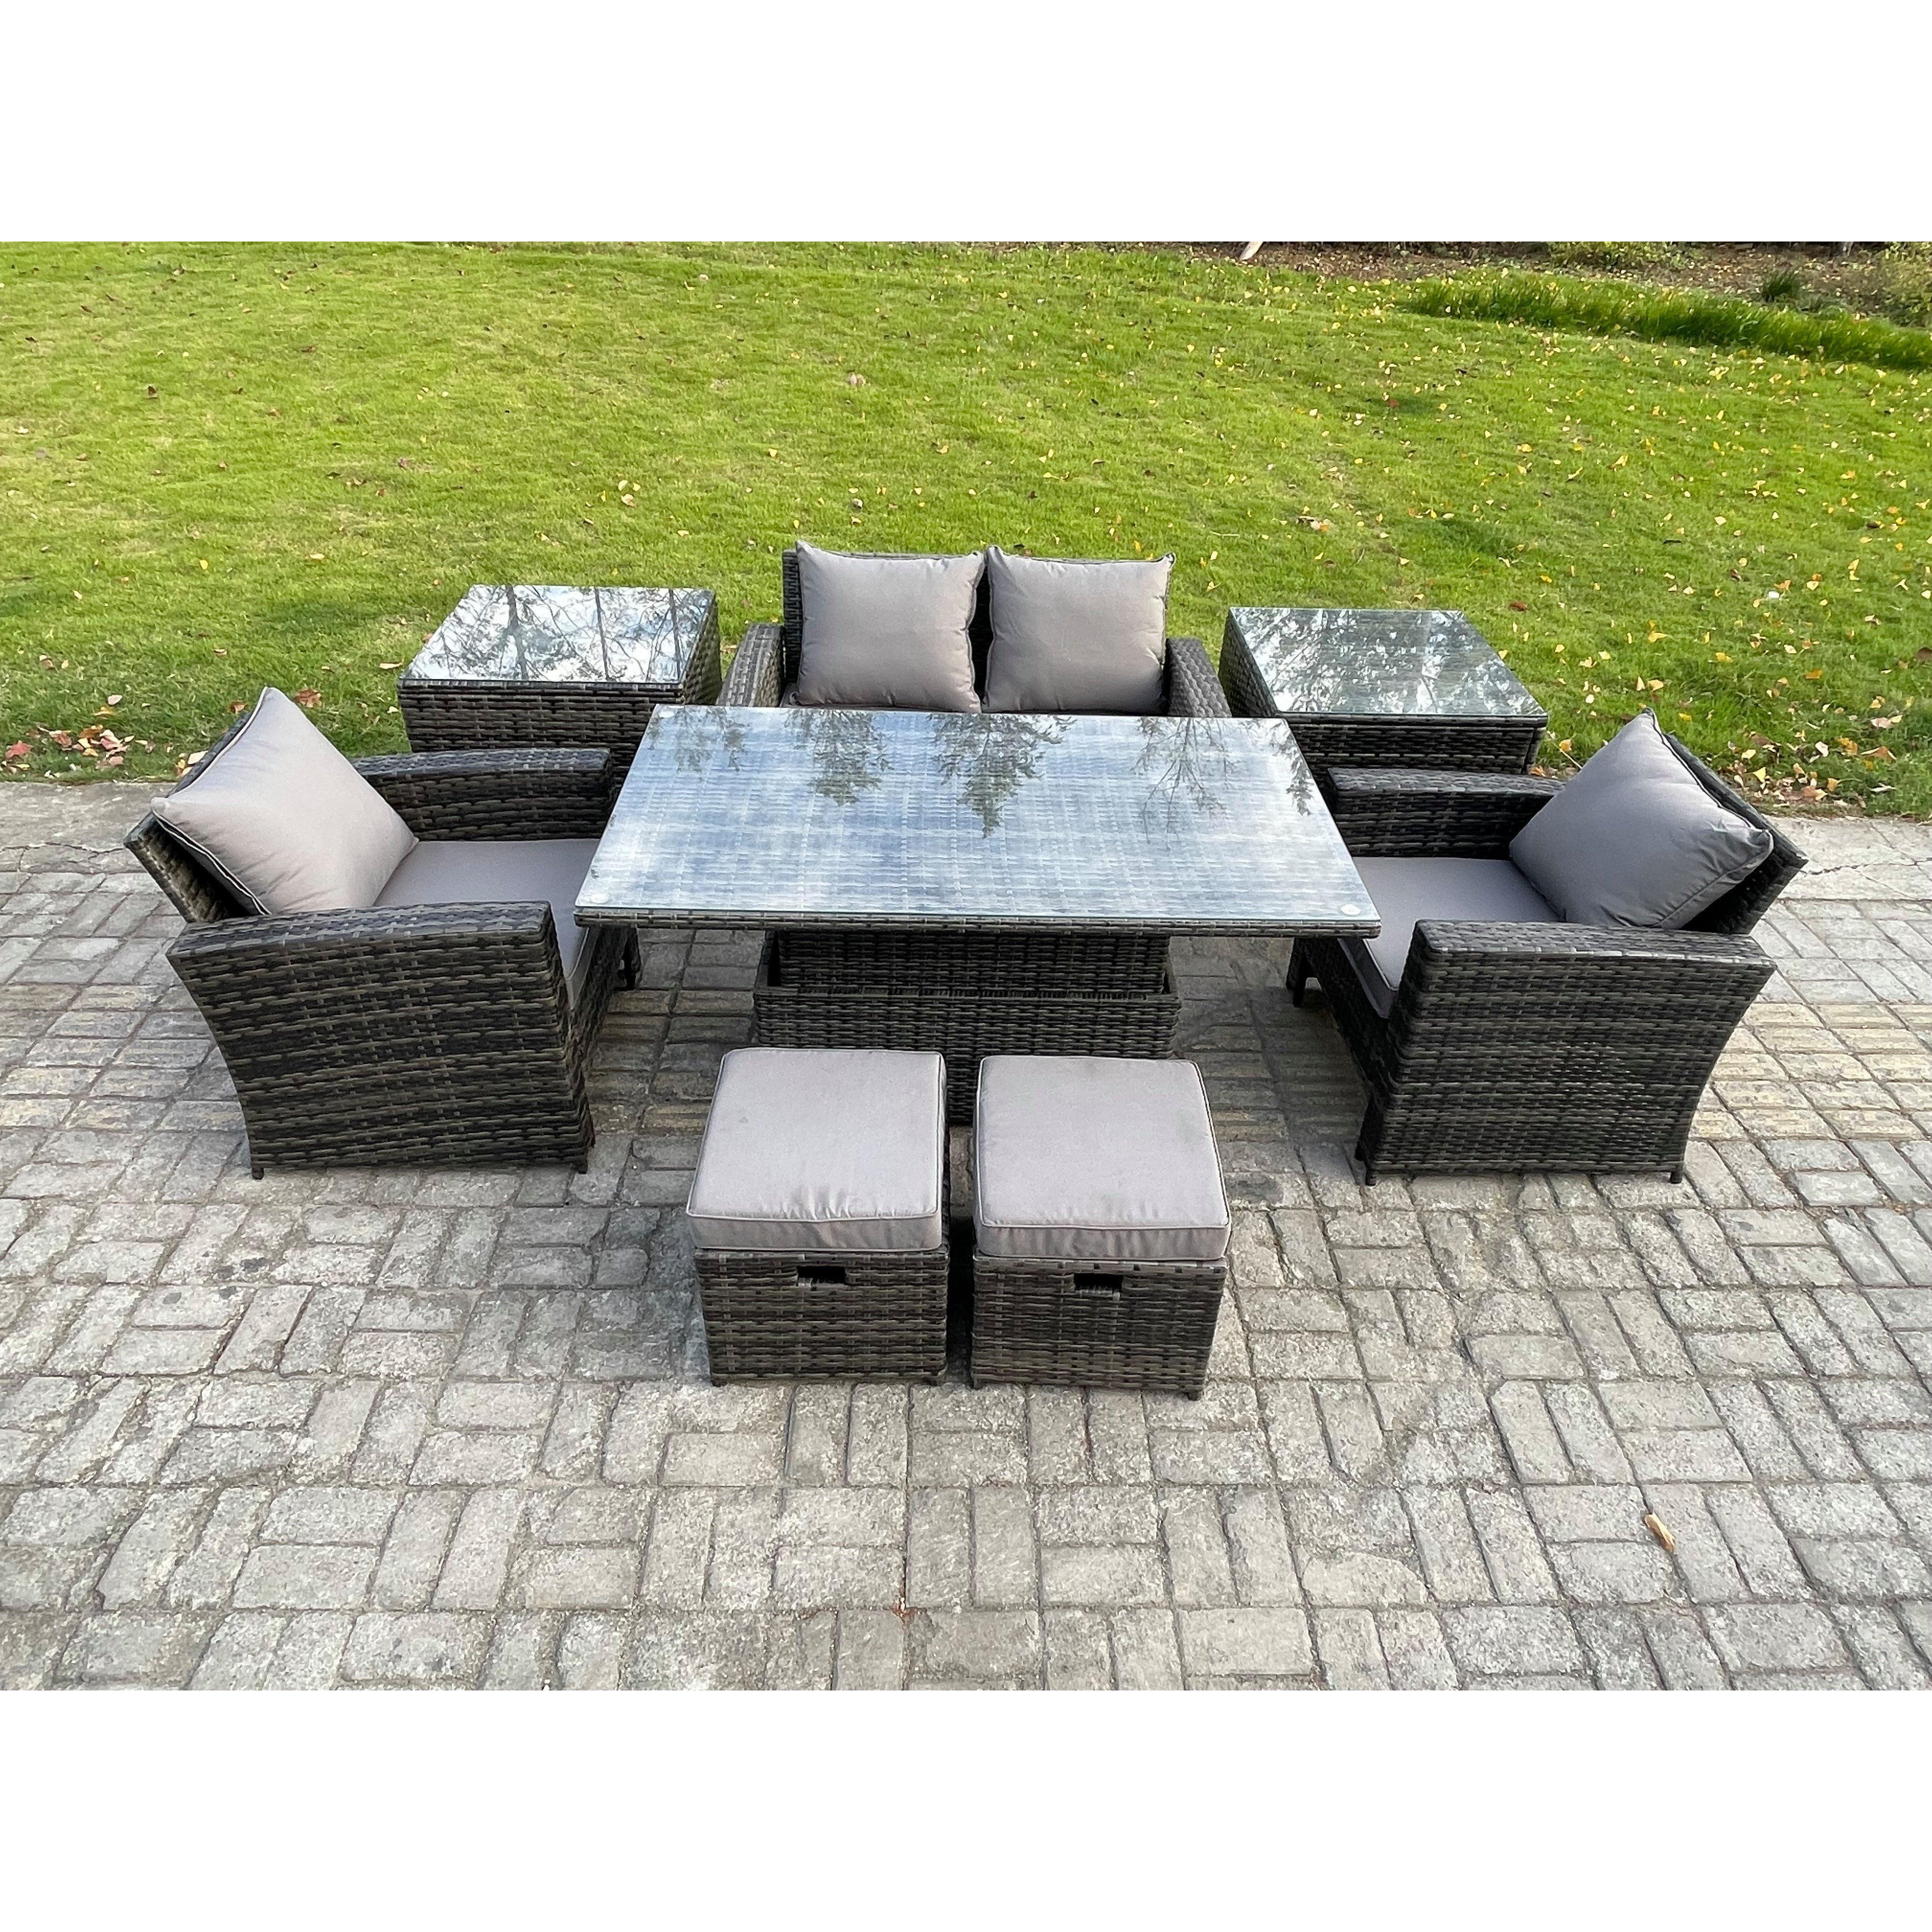 Rattan Garden Furniture Sofa Sets with Height Adjustable Rising Lifting Table 2 Side Tables 2 Small Footstools - image 1